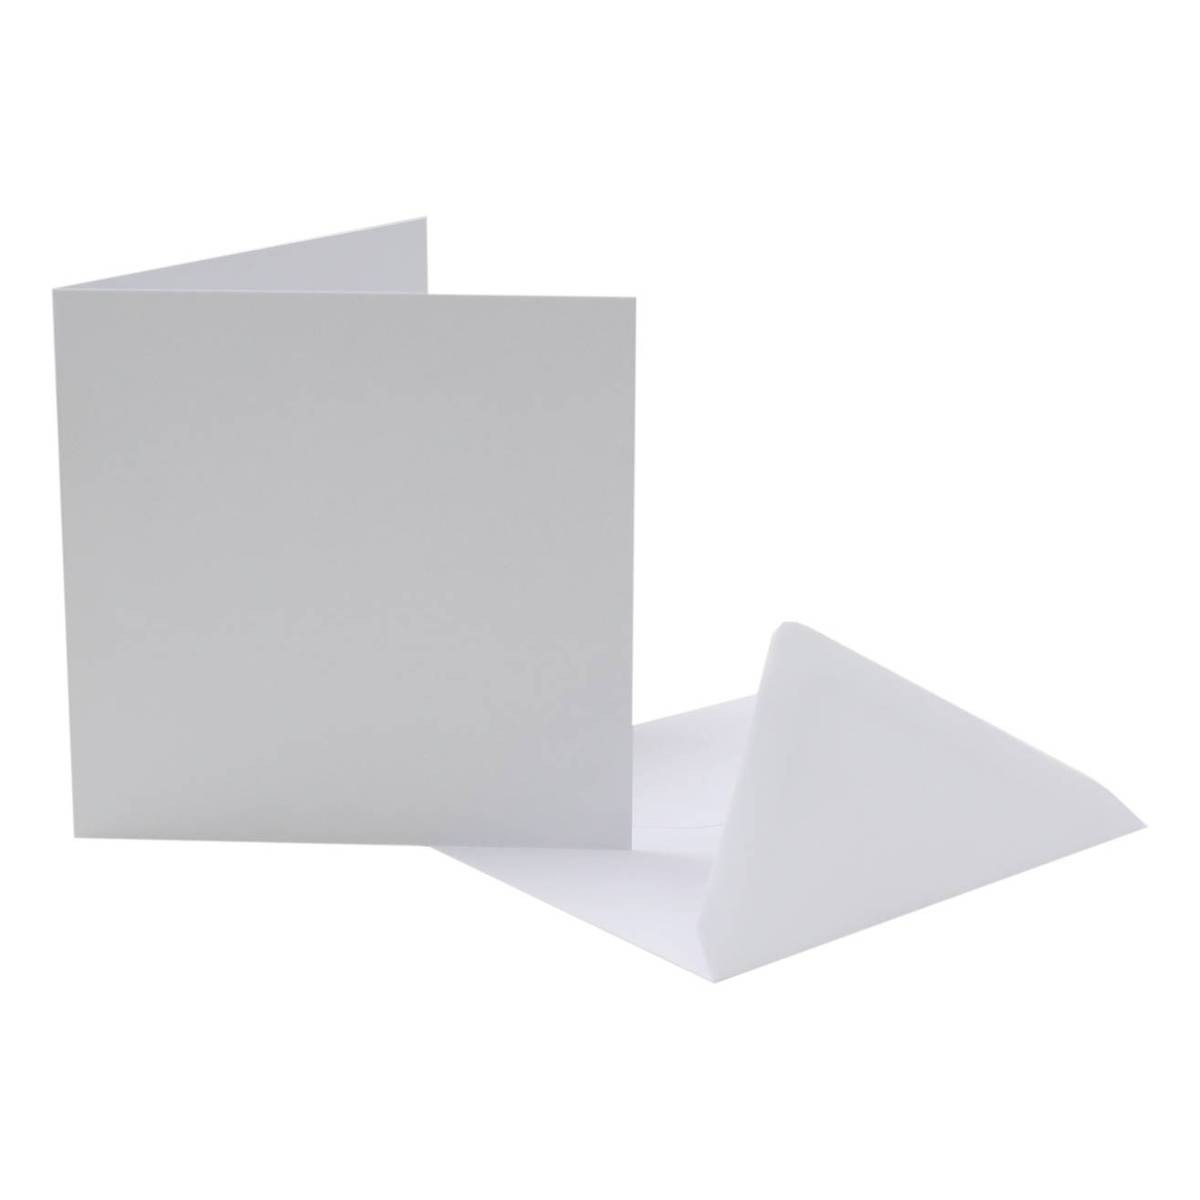 Card Blanks, Blank Cards and Envelopes